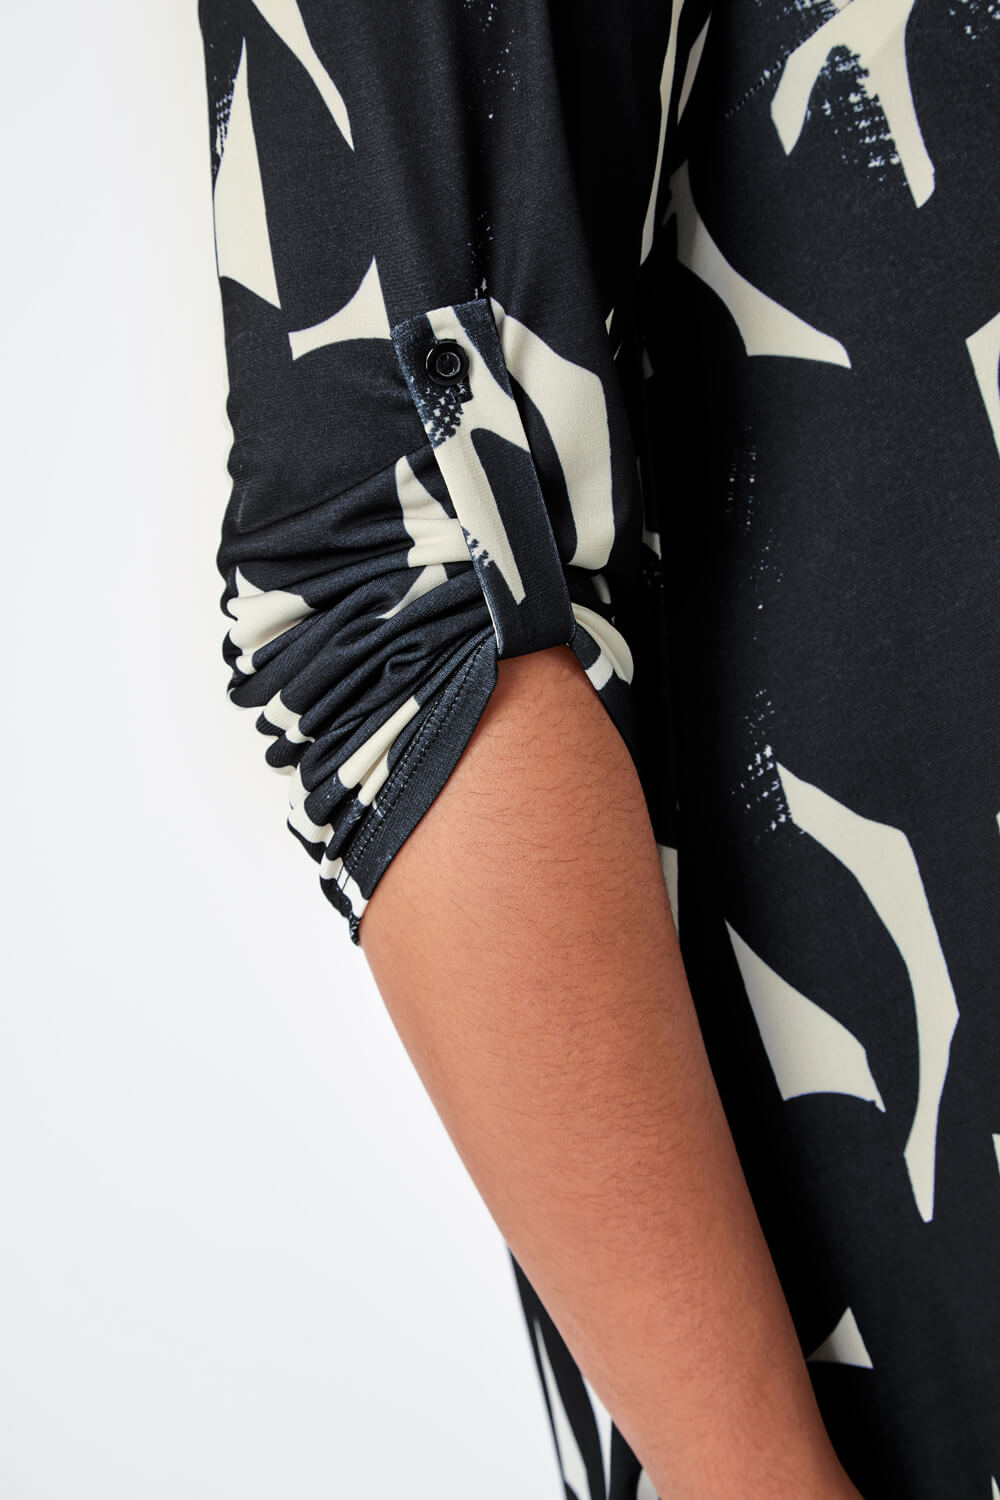 Black Curve Abstract Print Jersey Top, Image 5 of 5